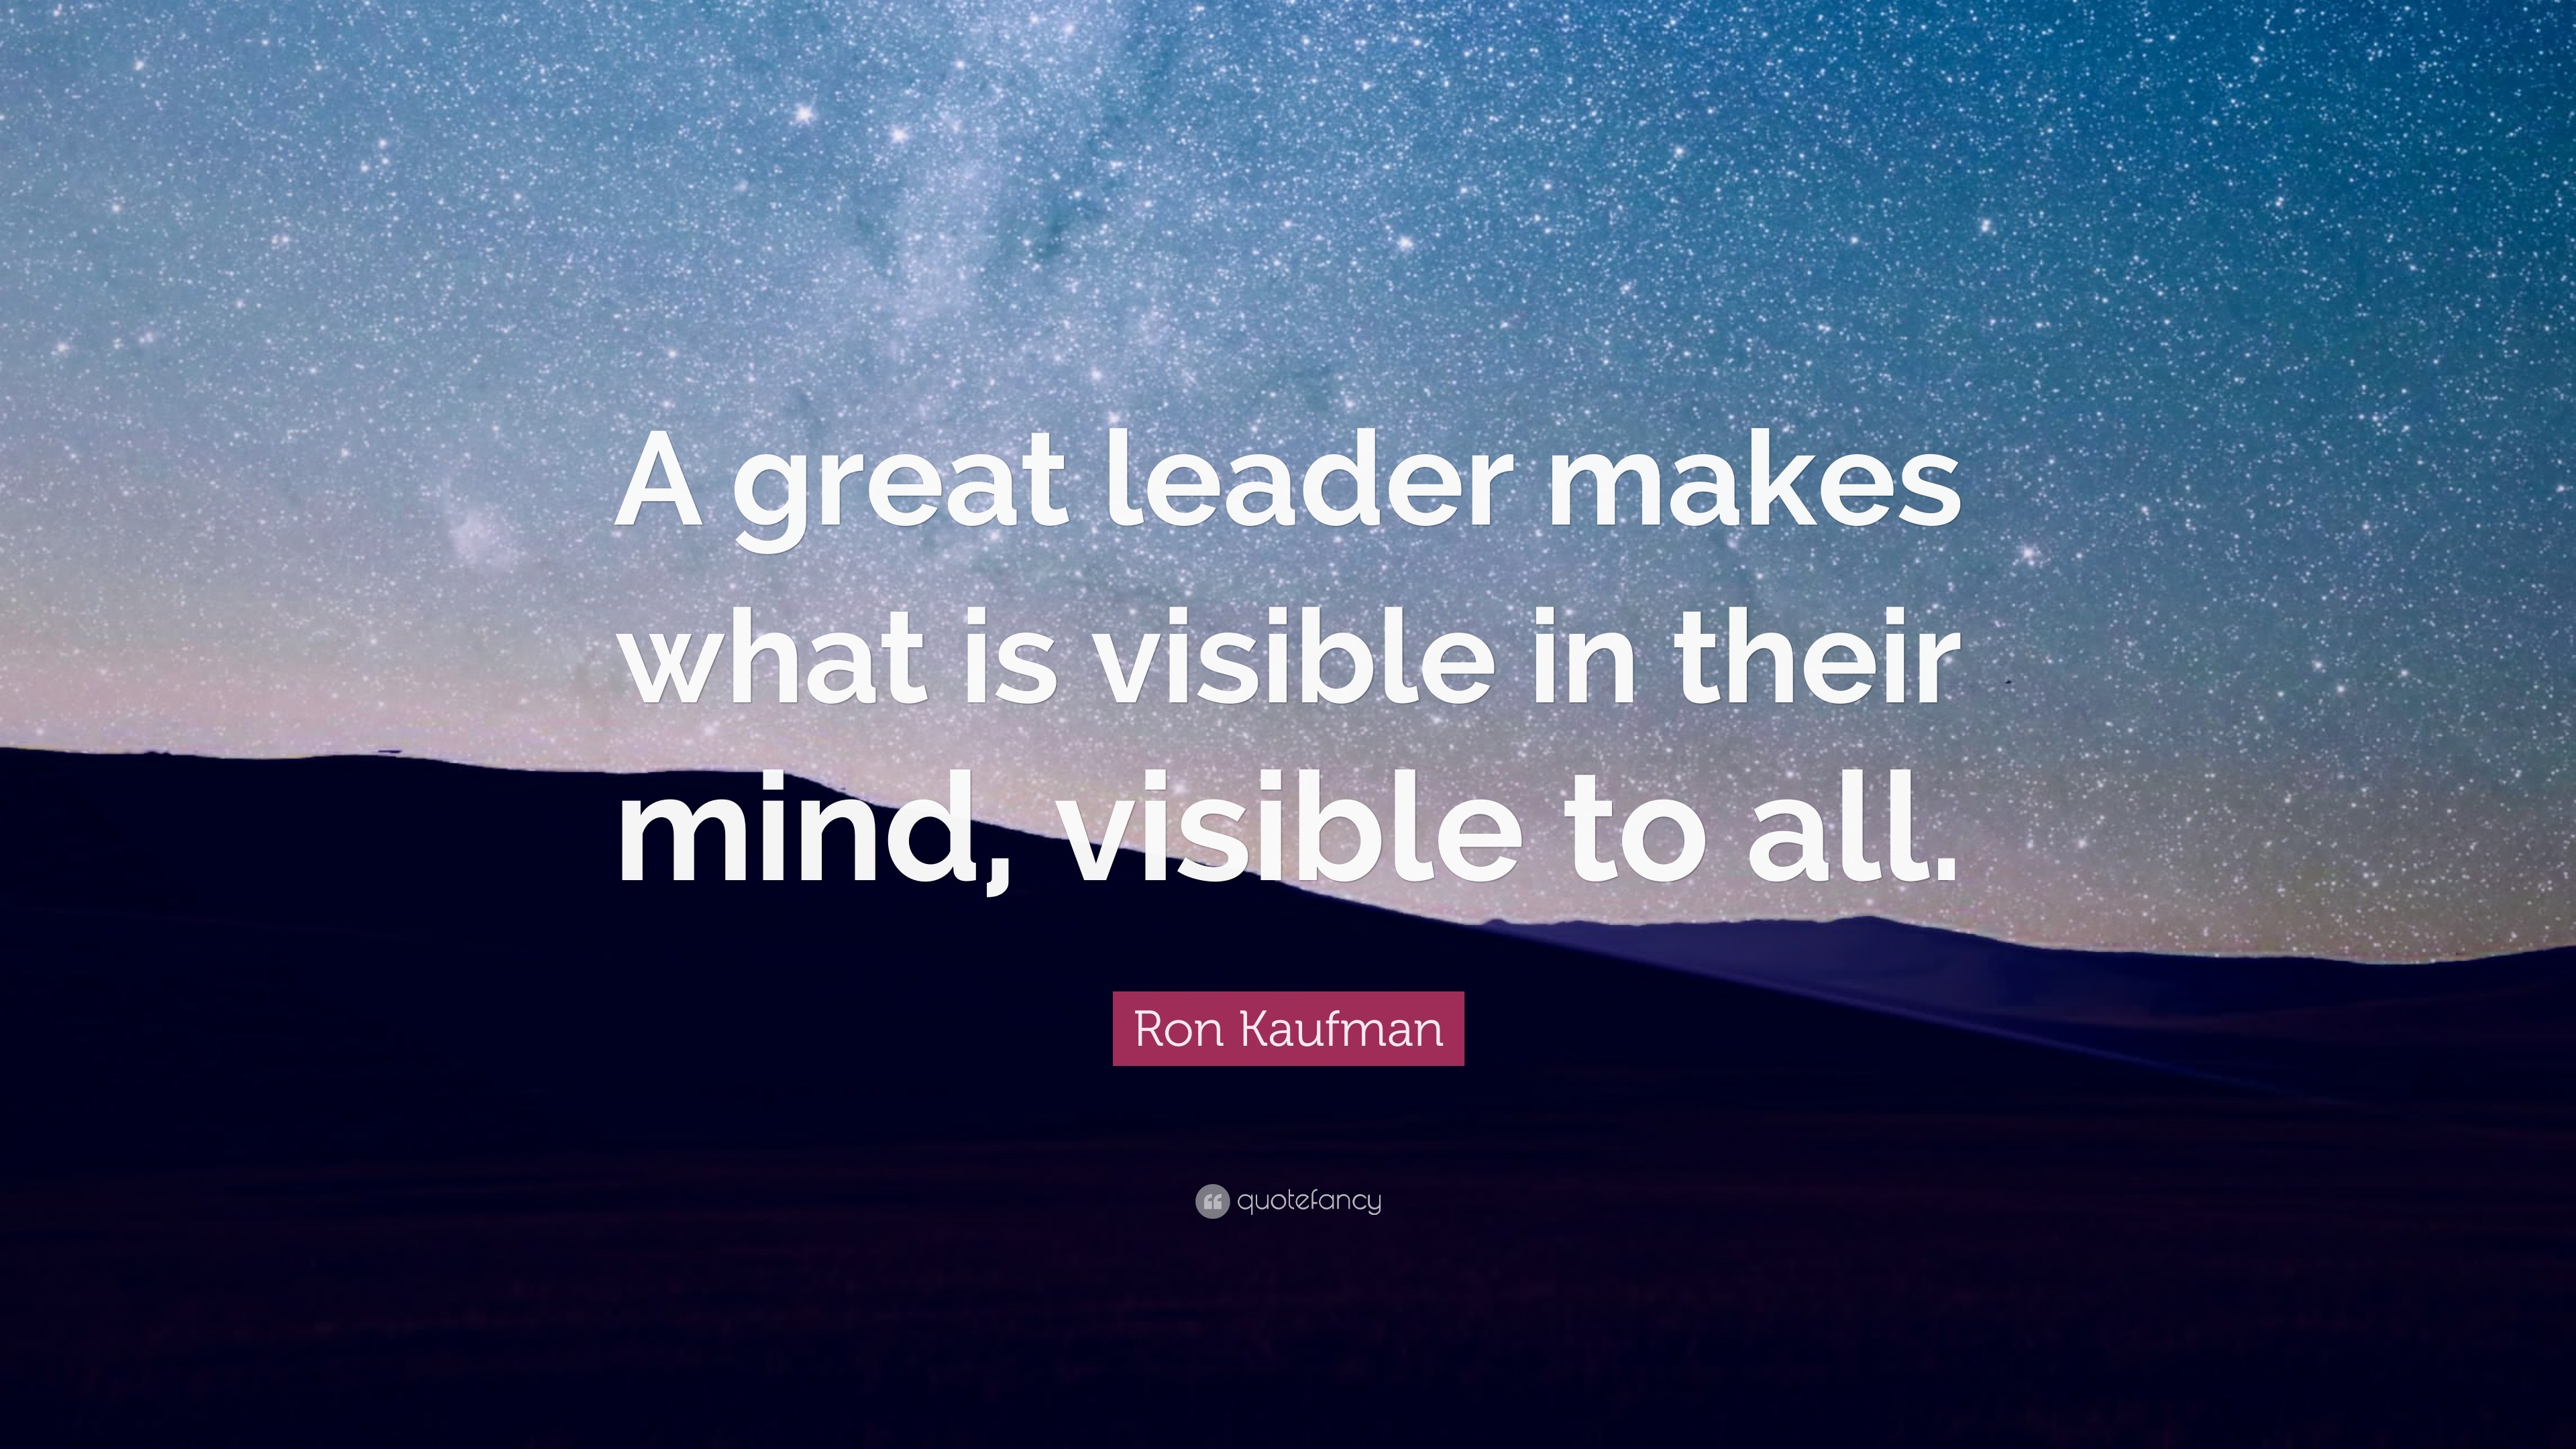 essay about what makes a great leader